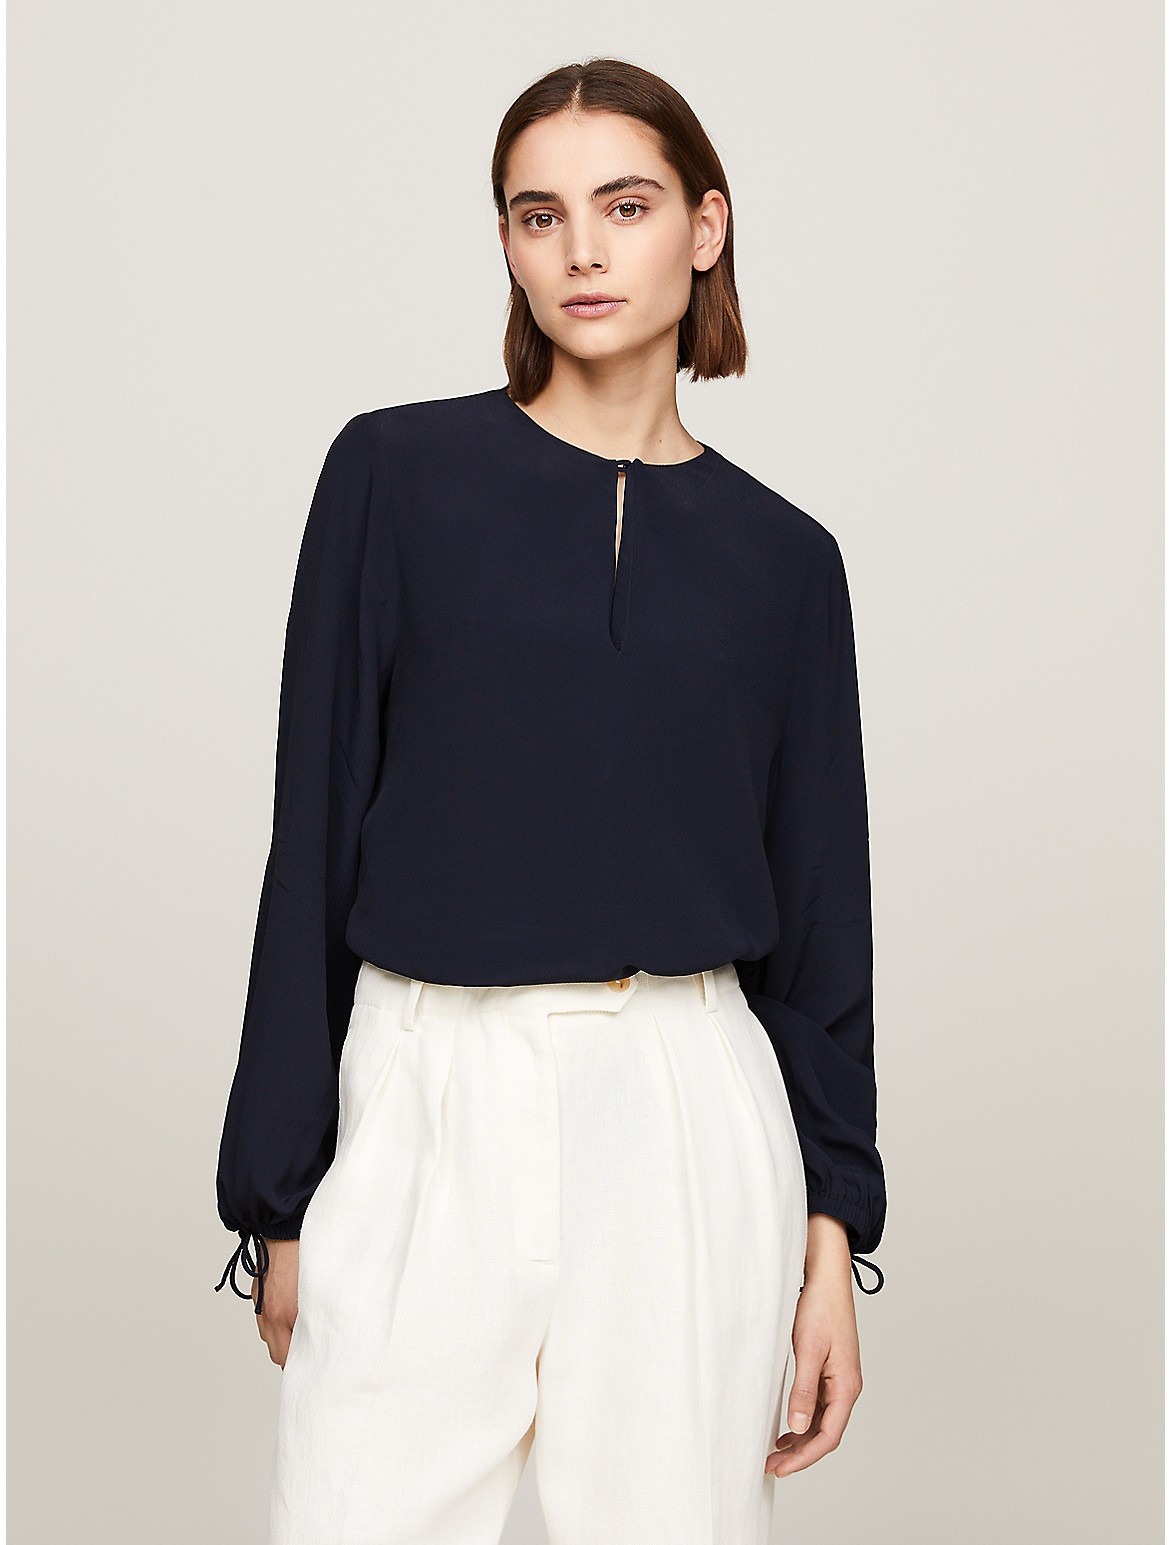 Tommy Hilfiger Women's Relaxed Fit Keyhole Crepe Blouse